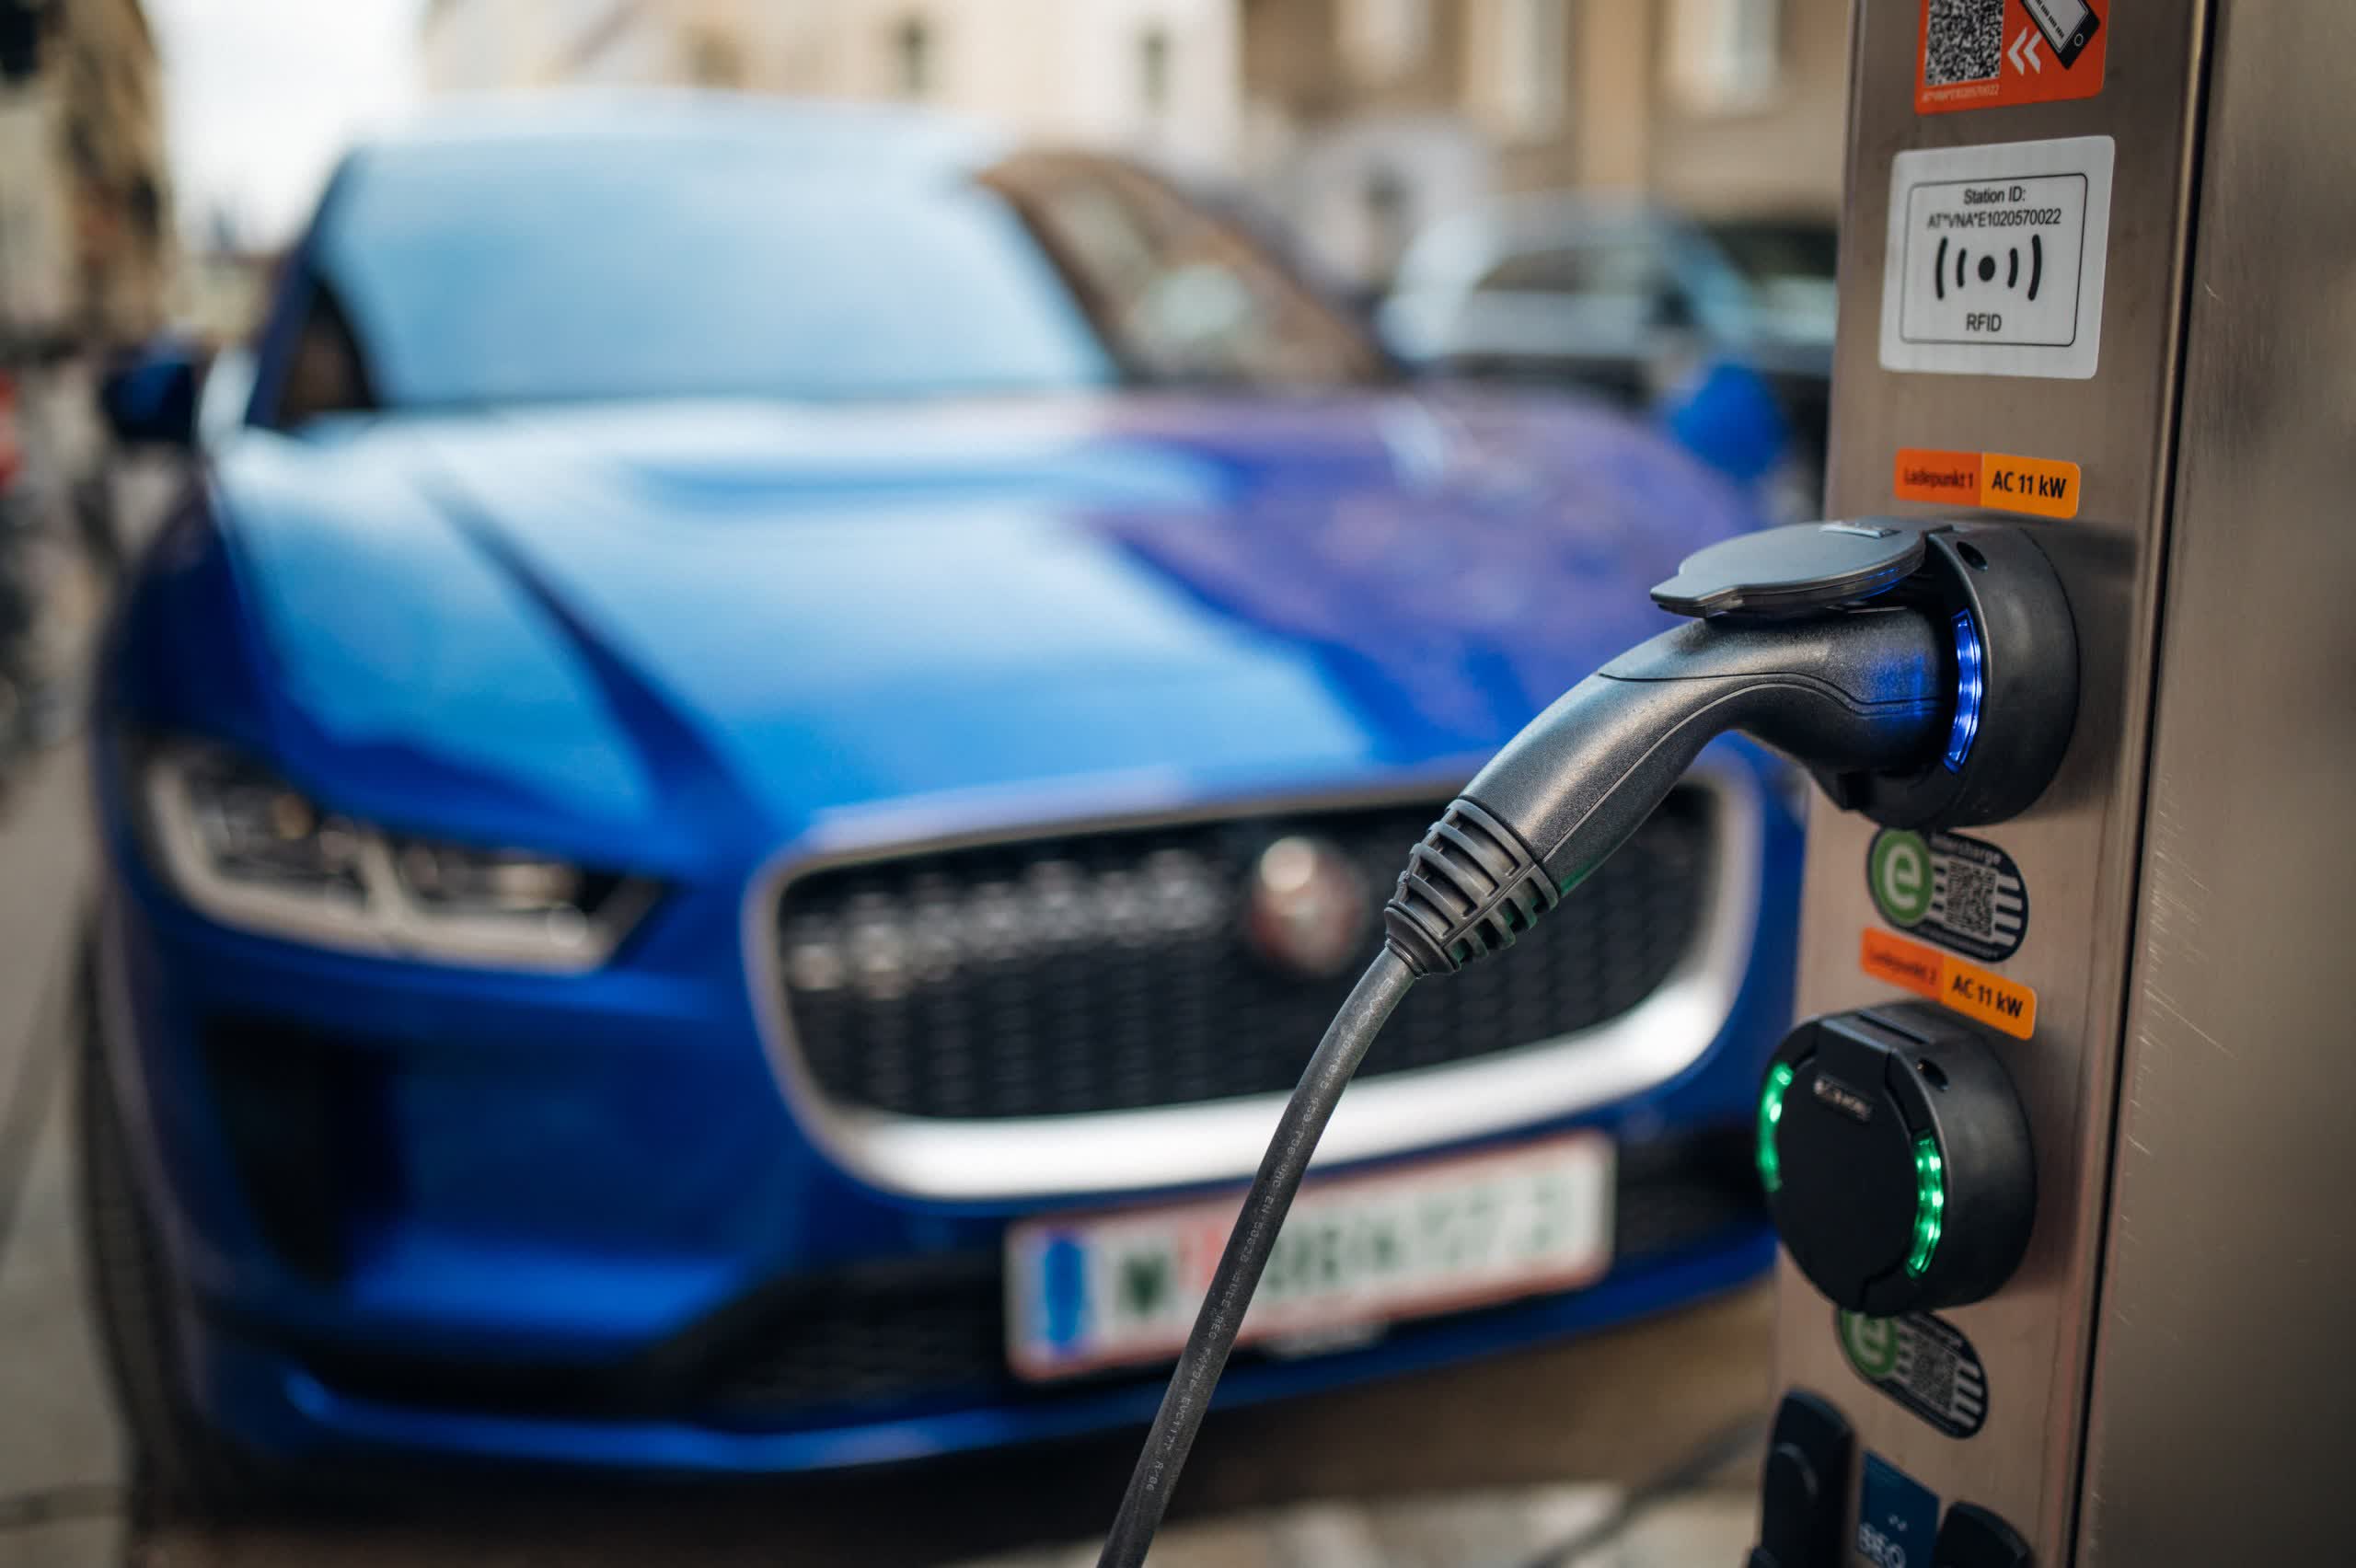 European Union will ban new gas-powered car sales by 2035